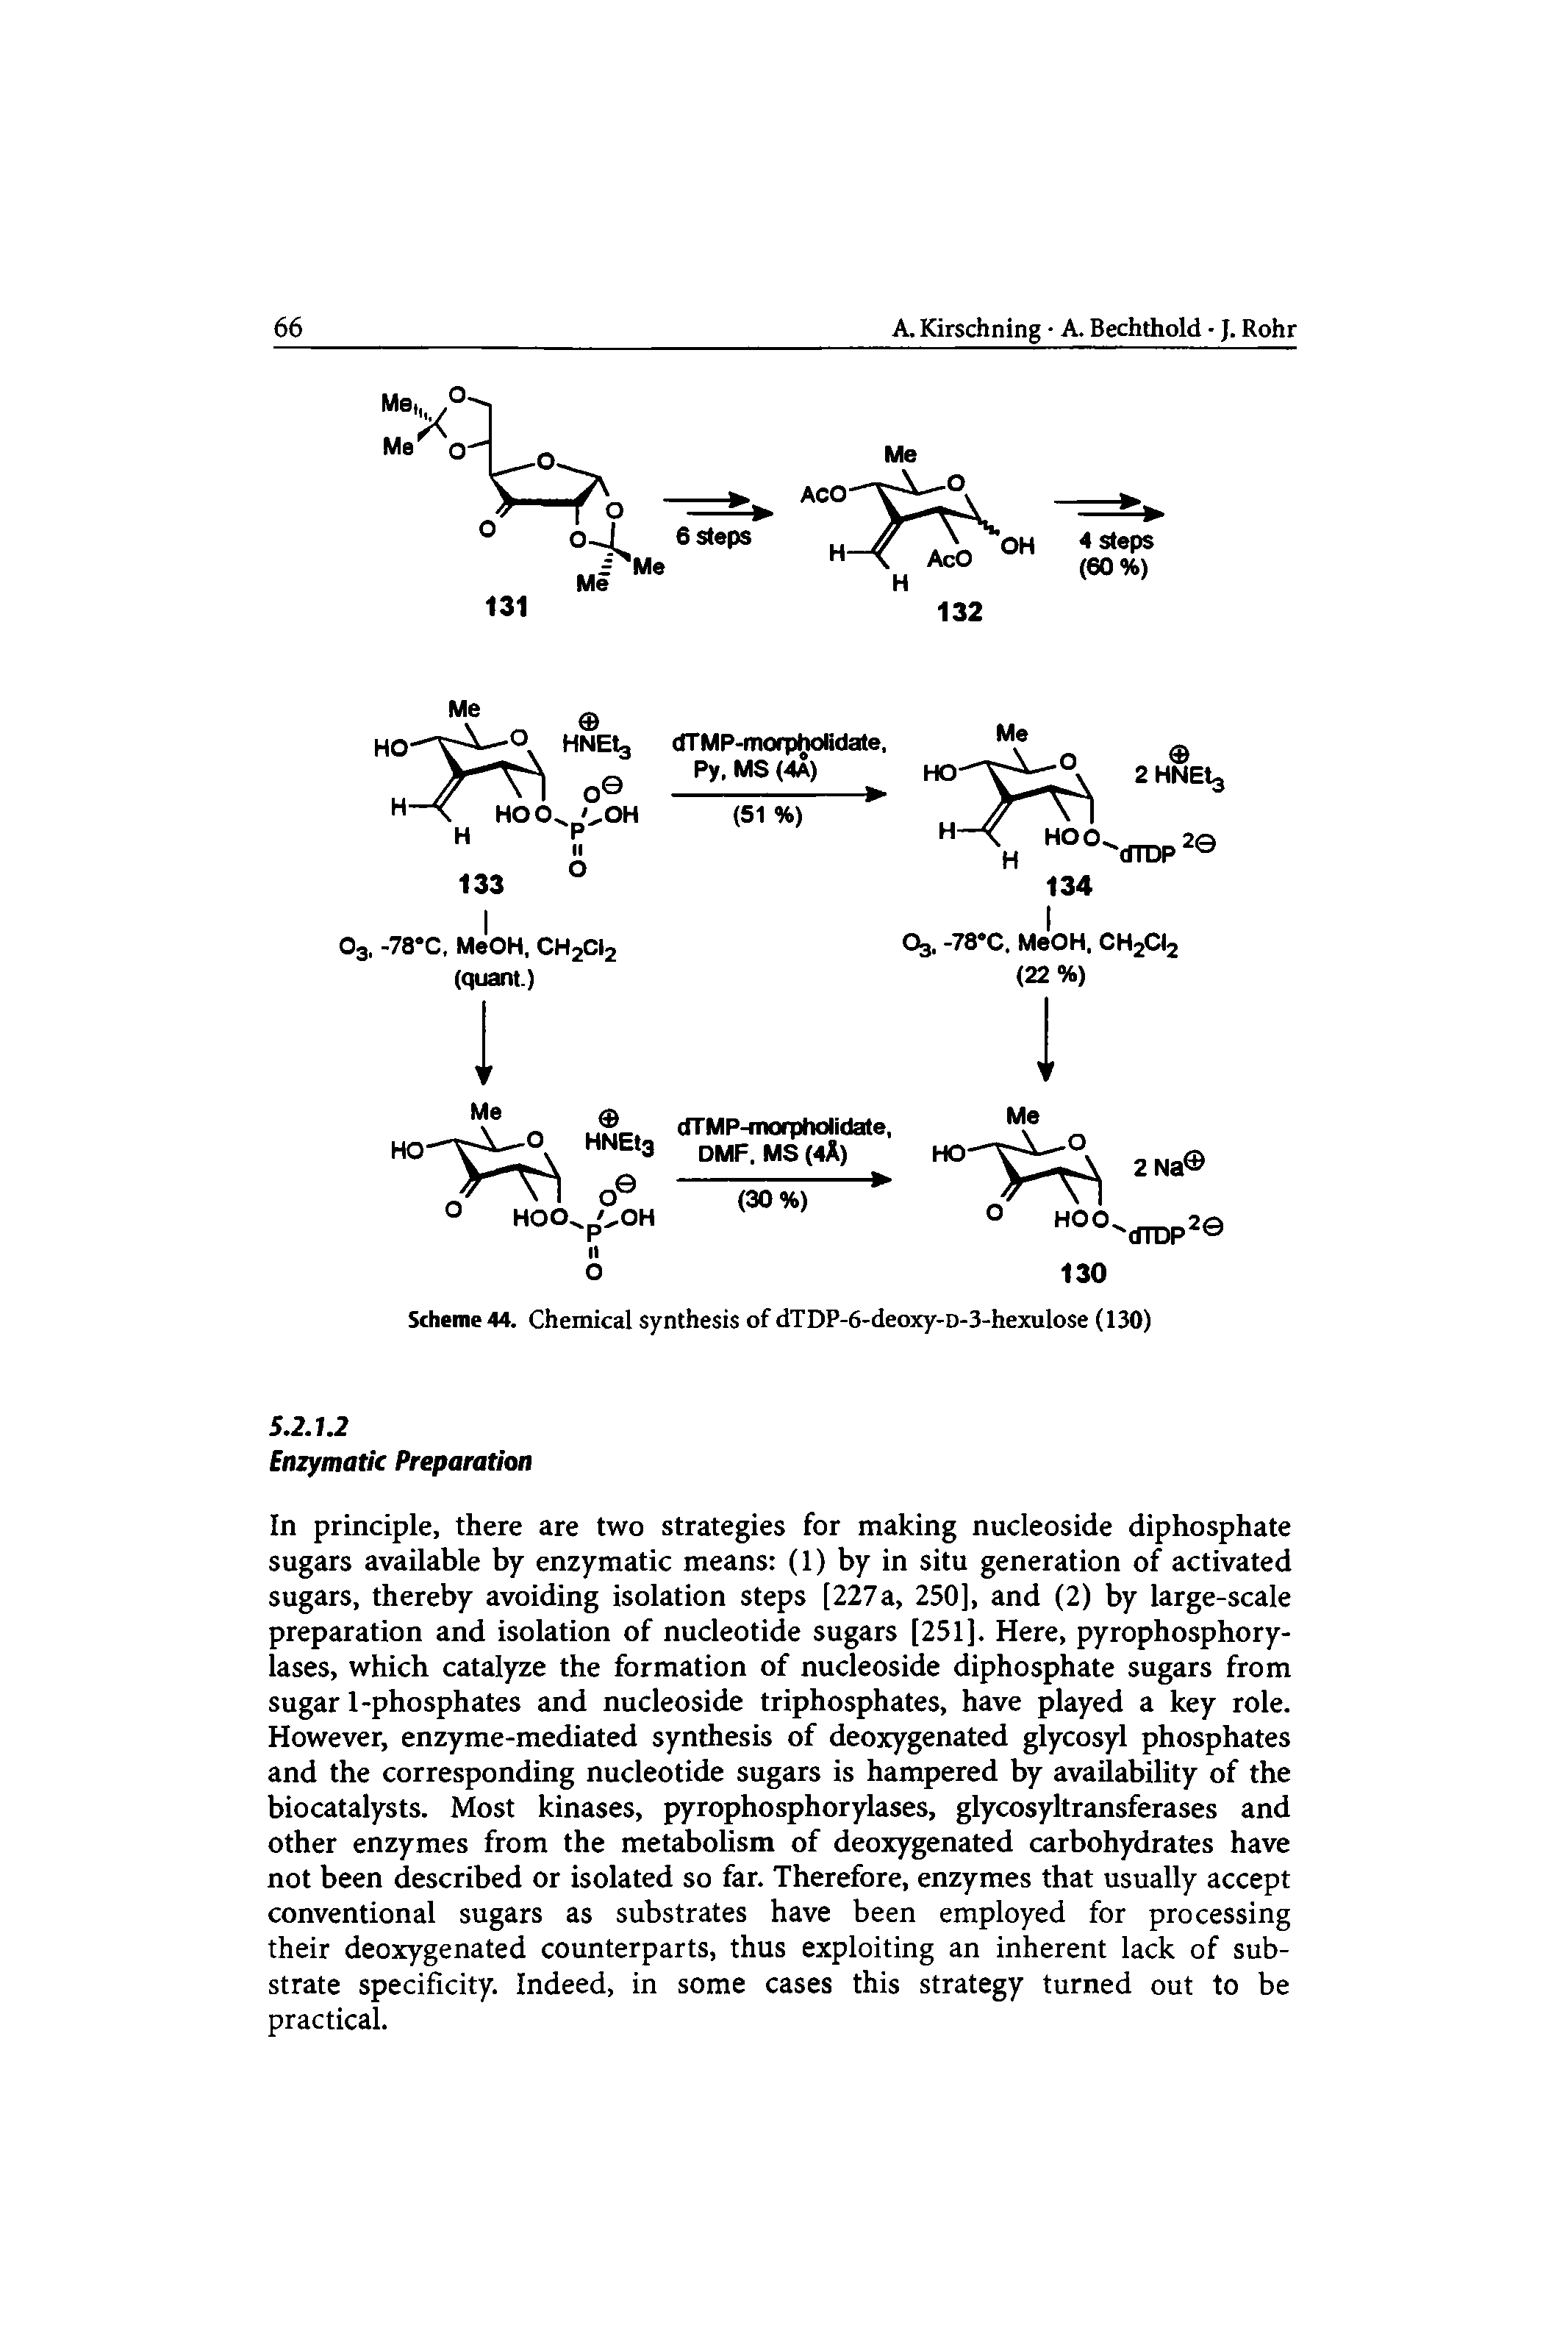 Scheme 44. Chemical synthesis of dTDP-6-deoxy-D-3-hexulose (130)...